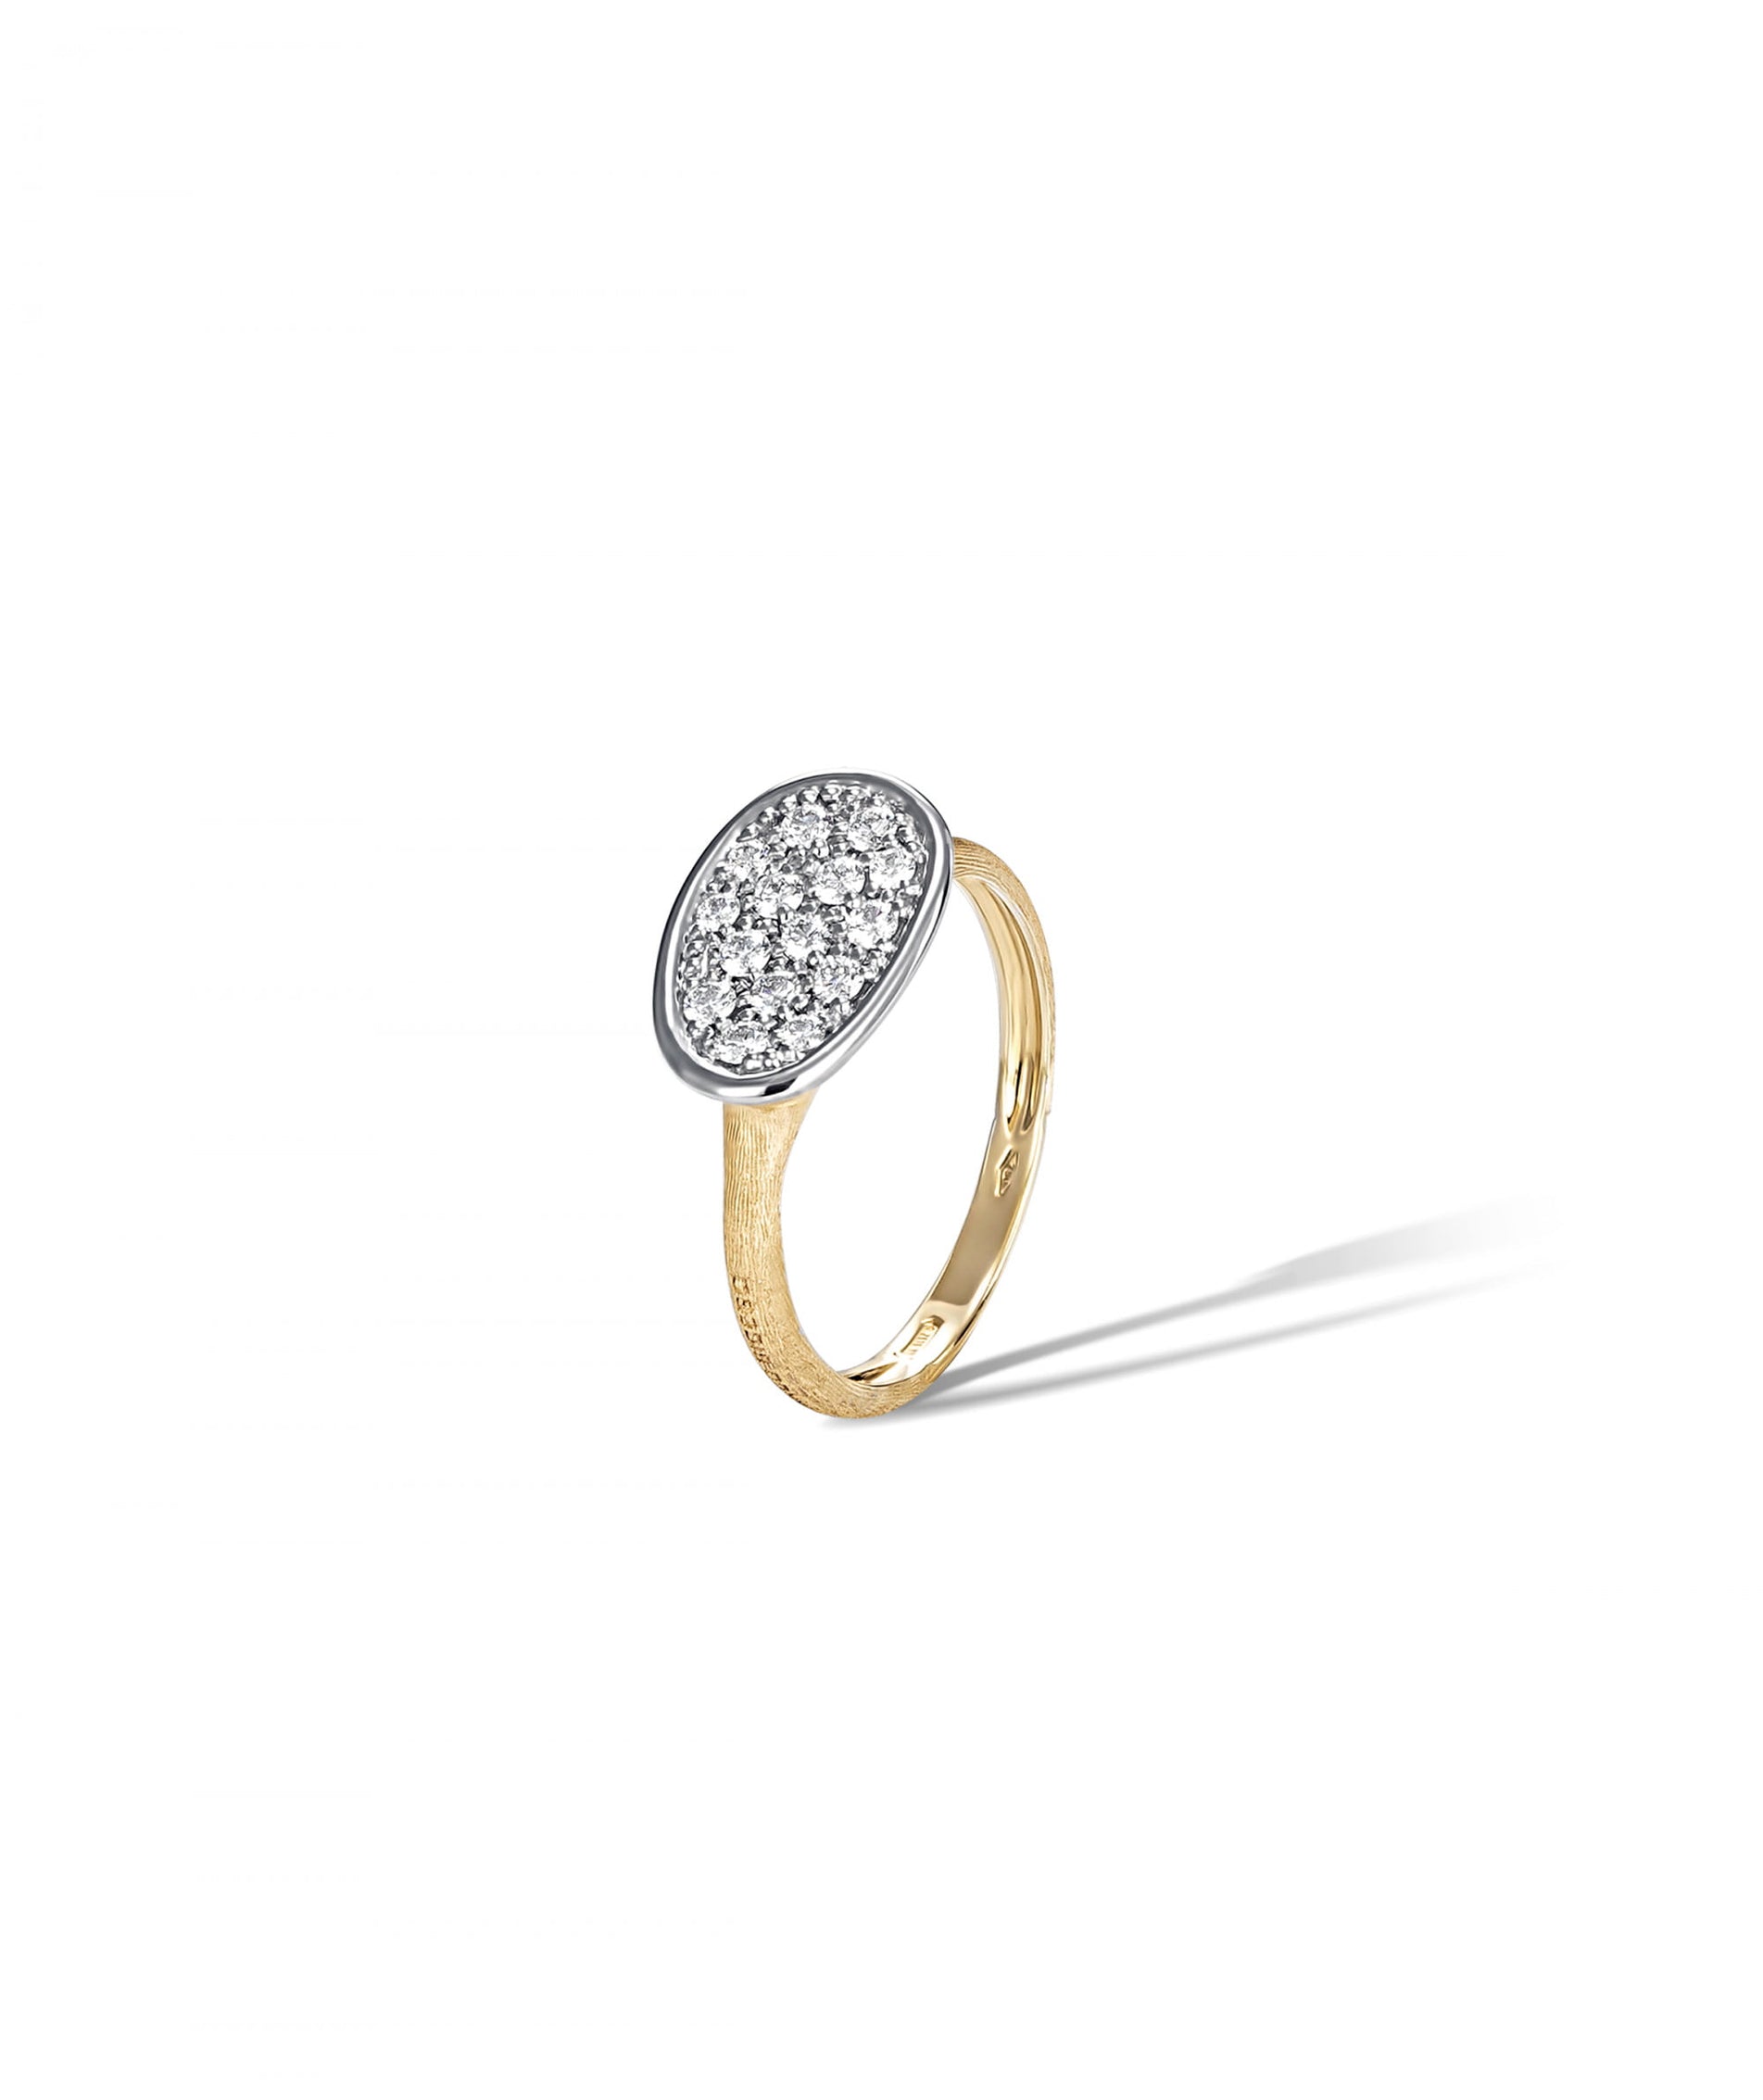 Marco Bicego Lunaria Mini Ring in 18k Yellow and White Gold with Diamonds - Orsini Jewellers NZ